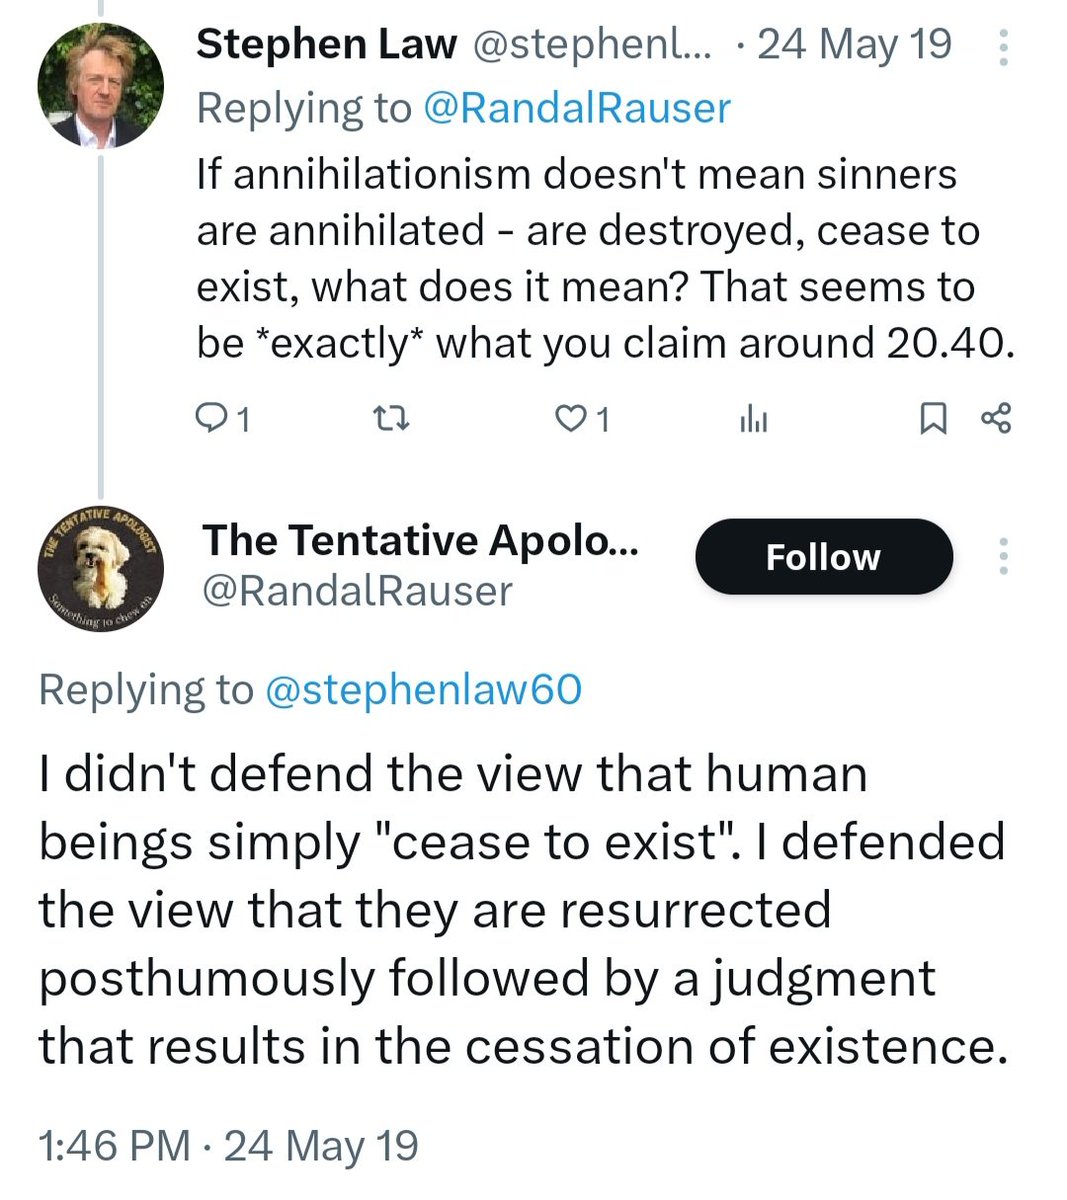 Did he forget he's an annihilationist?